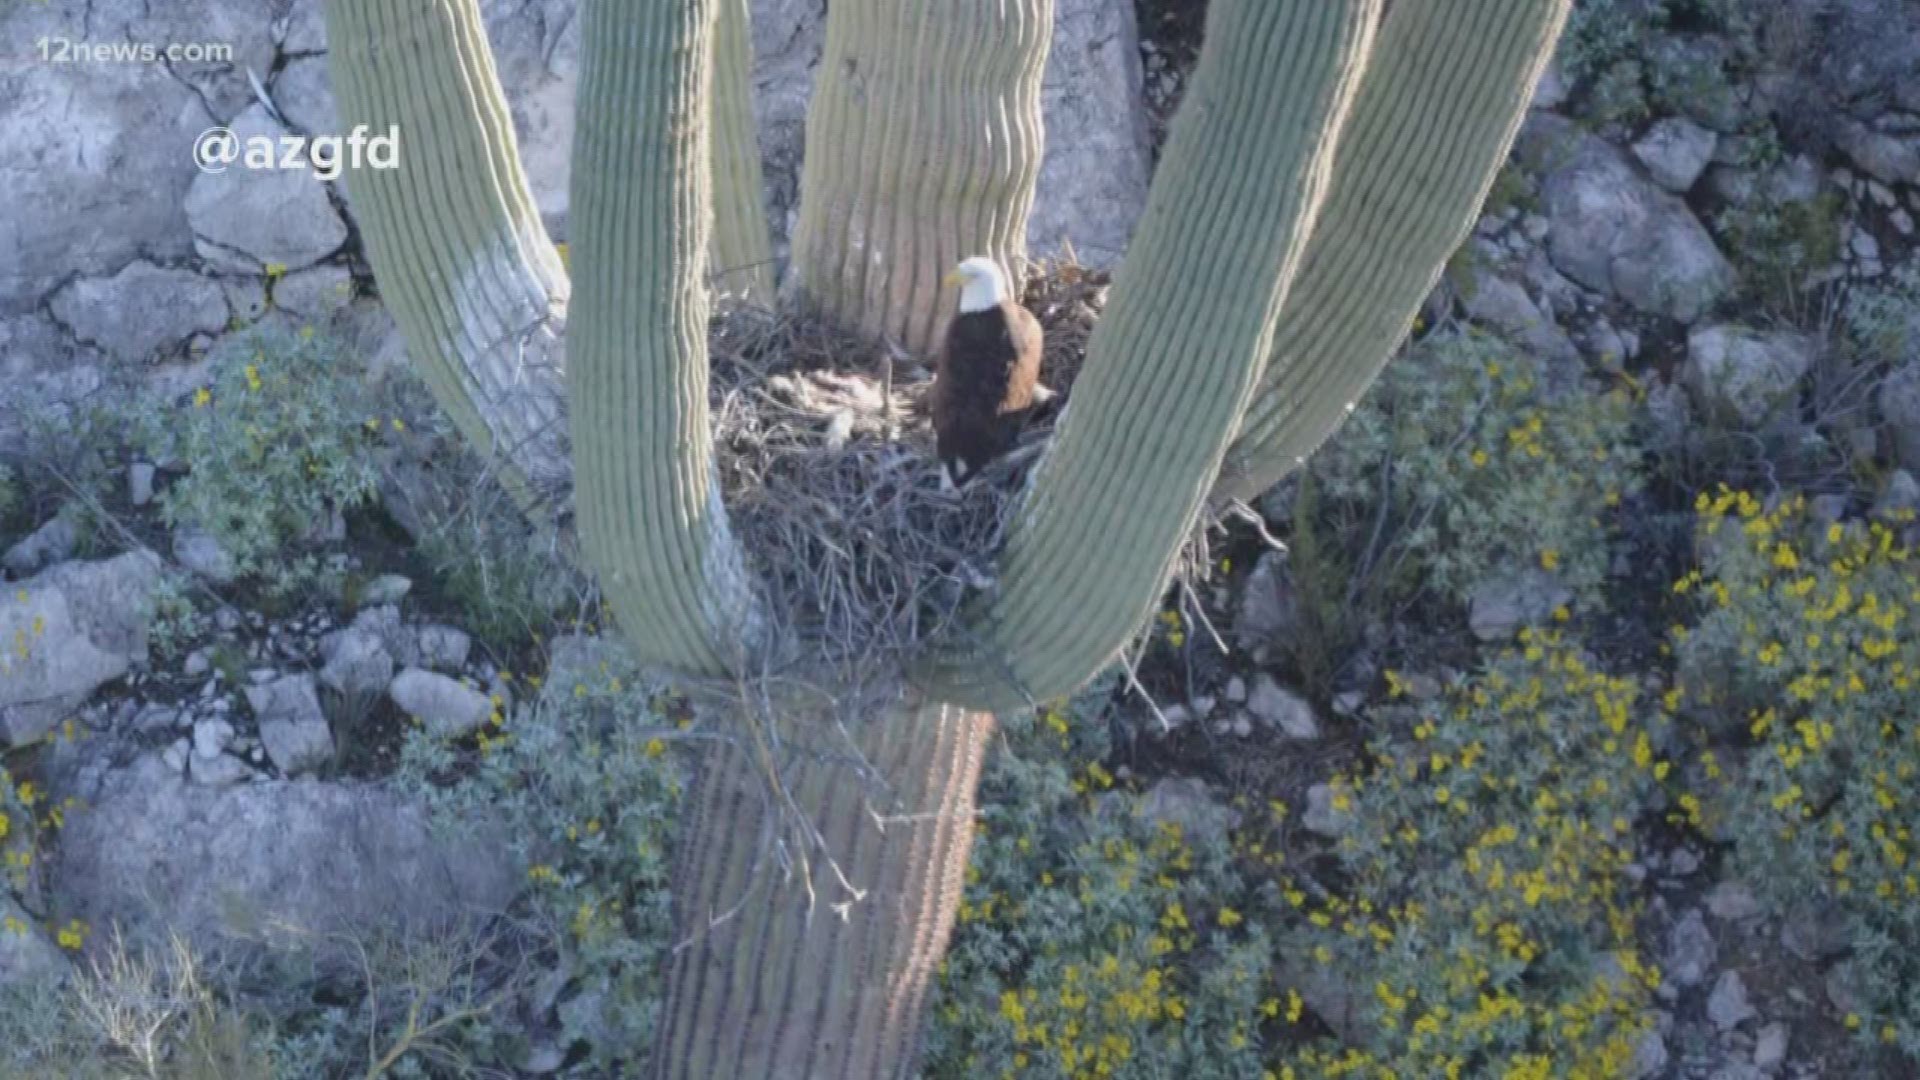 A pair of bald eagles were spotted nesting in a saguaro cactus with young eagles. The sighting has biologists from Arizona Game and Fish very excited.